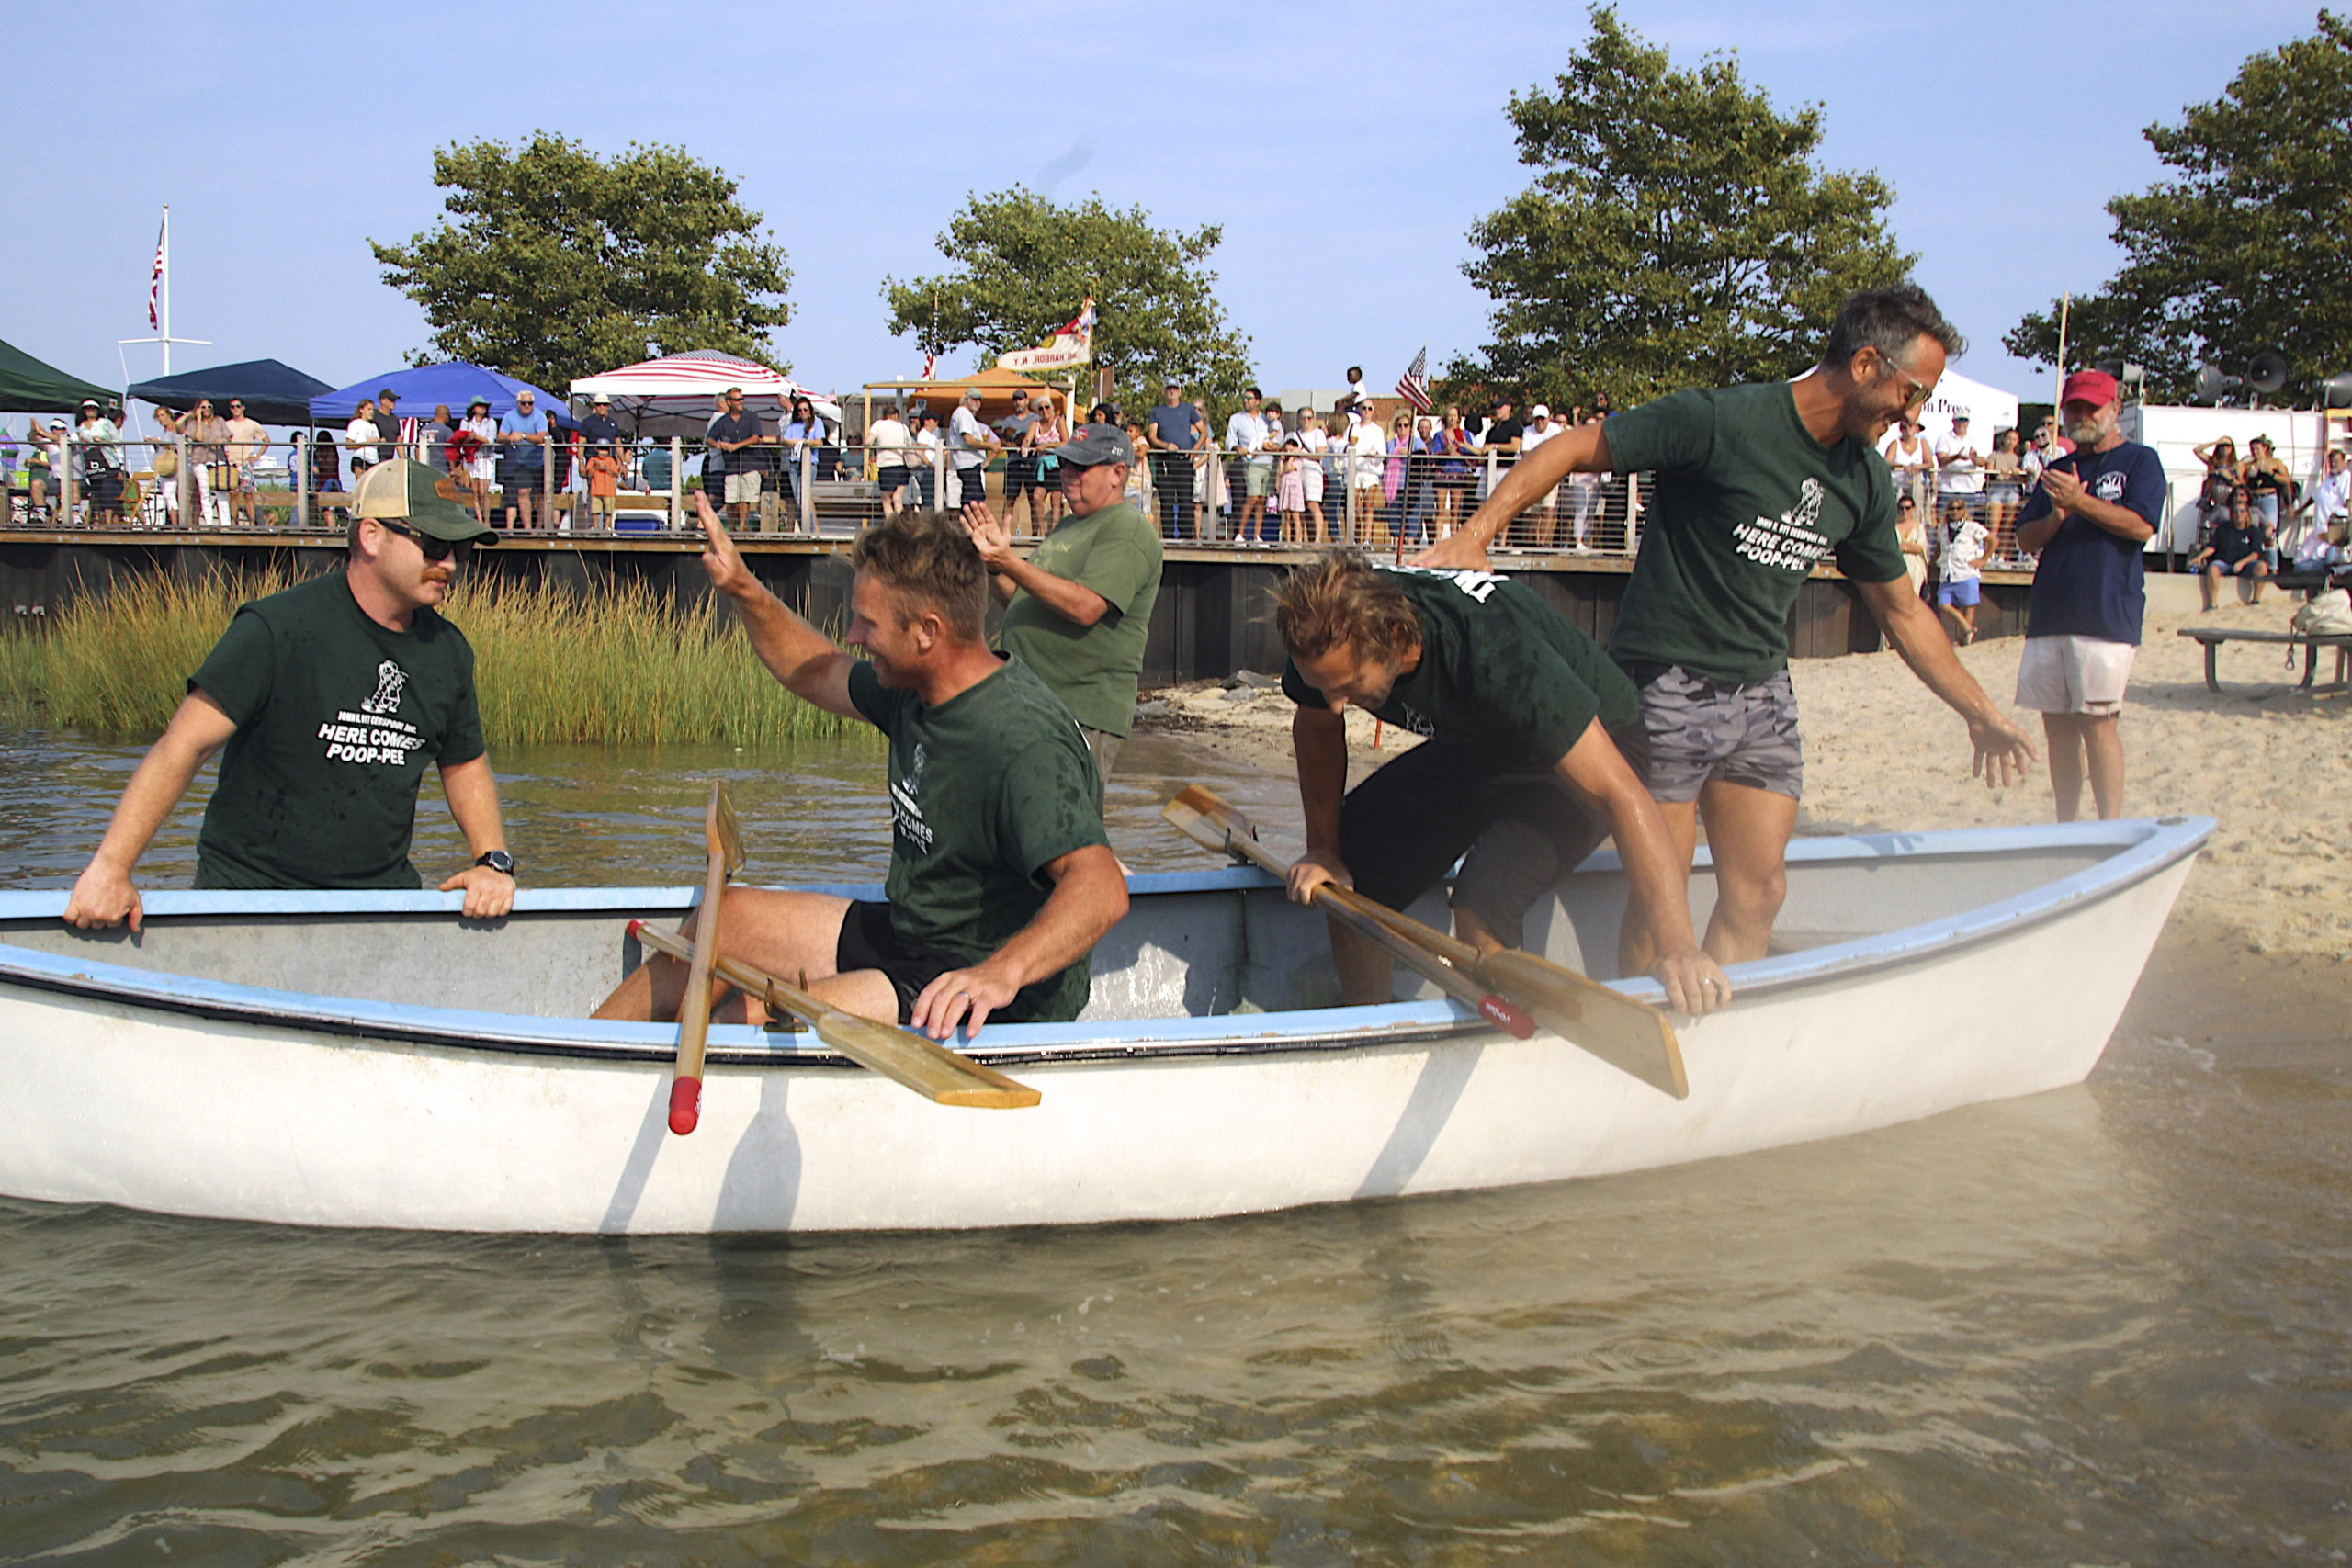 The champion men’s whaleboat team from John K. Ott Cesspool Services included, from left to right, Jeff Greenwald, Brian O’Sullivan, Pete Finelli, Eric Bramoff and Kevin O’Brien Jr.   KYRIL BROMLEY